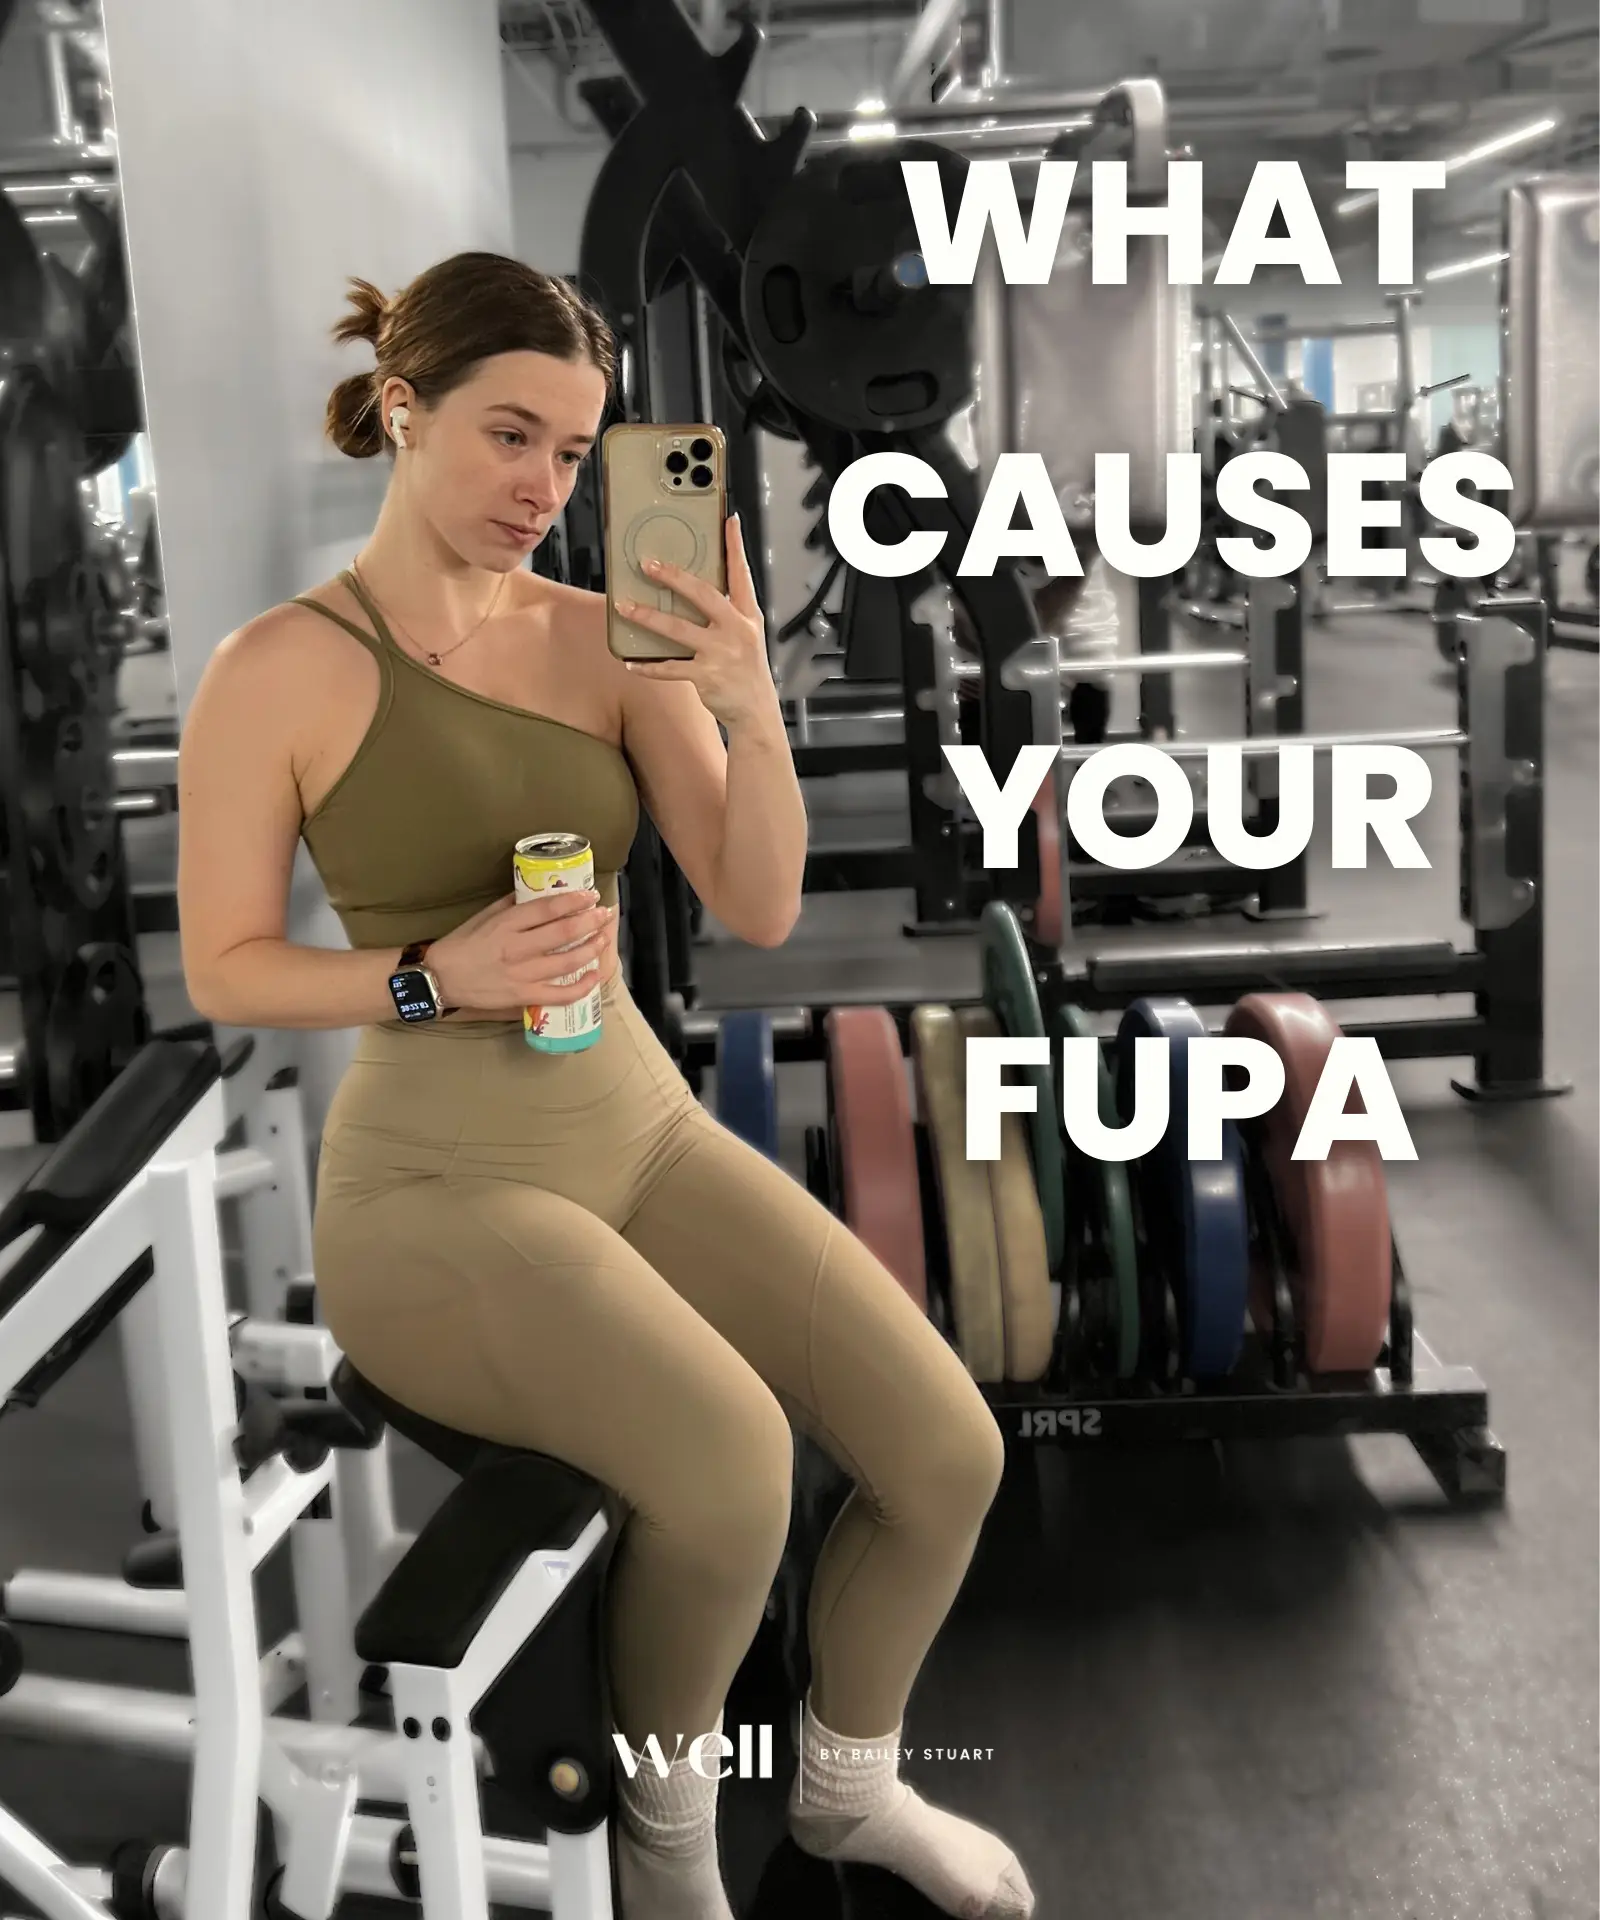 Get Rid of Your FUPA at Home  Got a FUPA? Try This Workout NOW for Results  